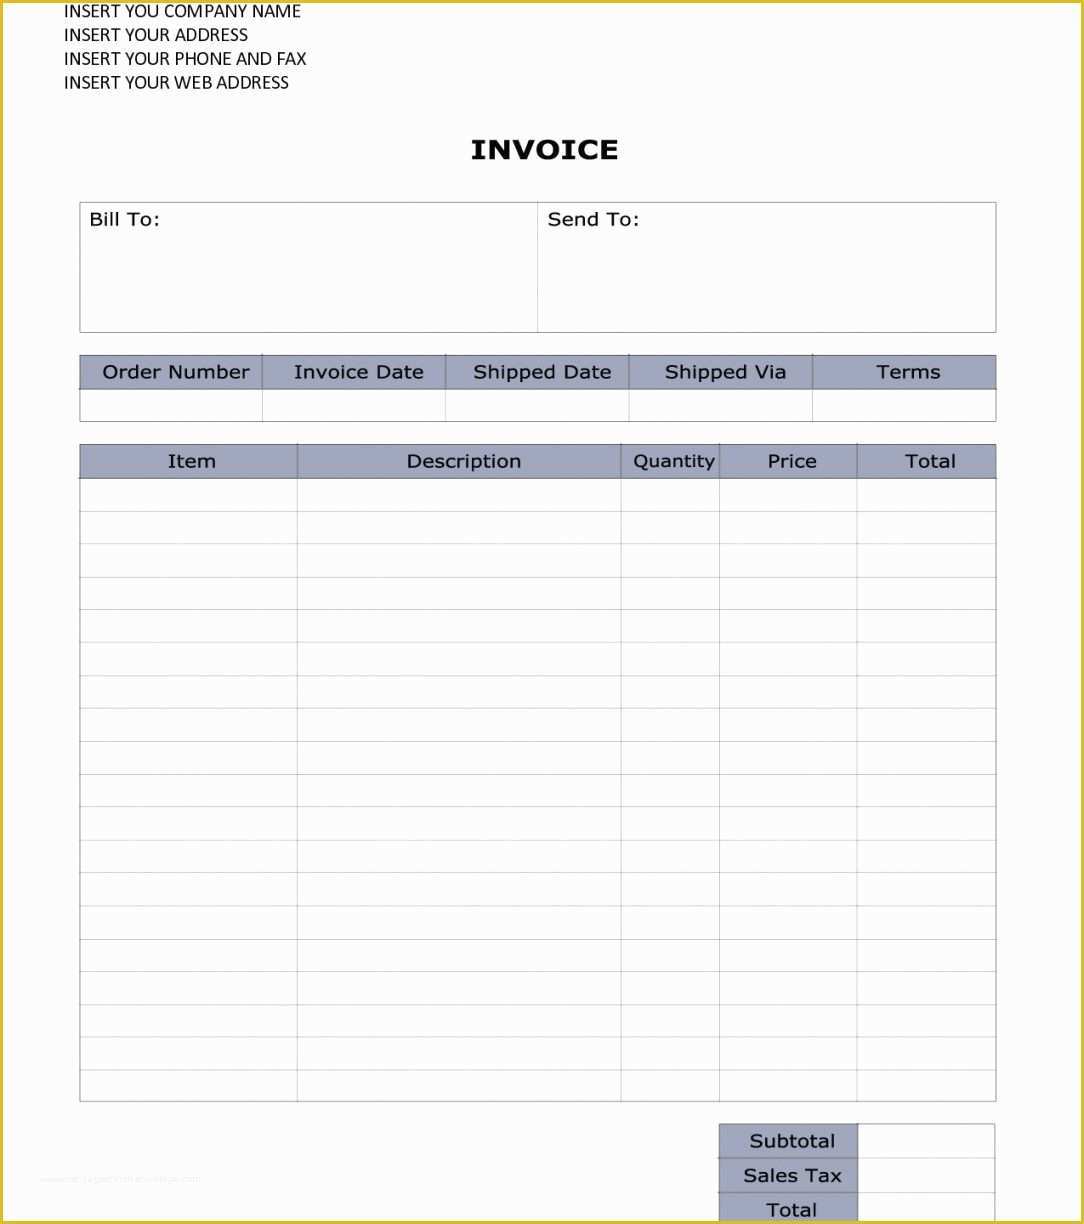 Microsoft Works Invoice Template Free Download Of Microsoft Works Templates Free Resume Download Spreadsheet